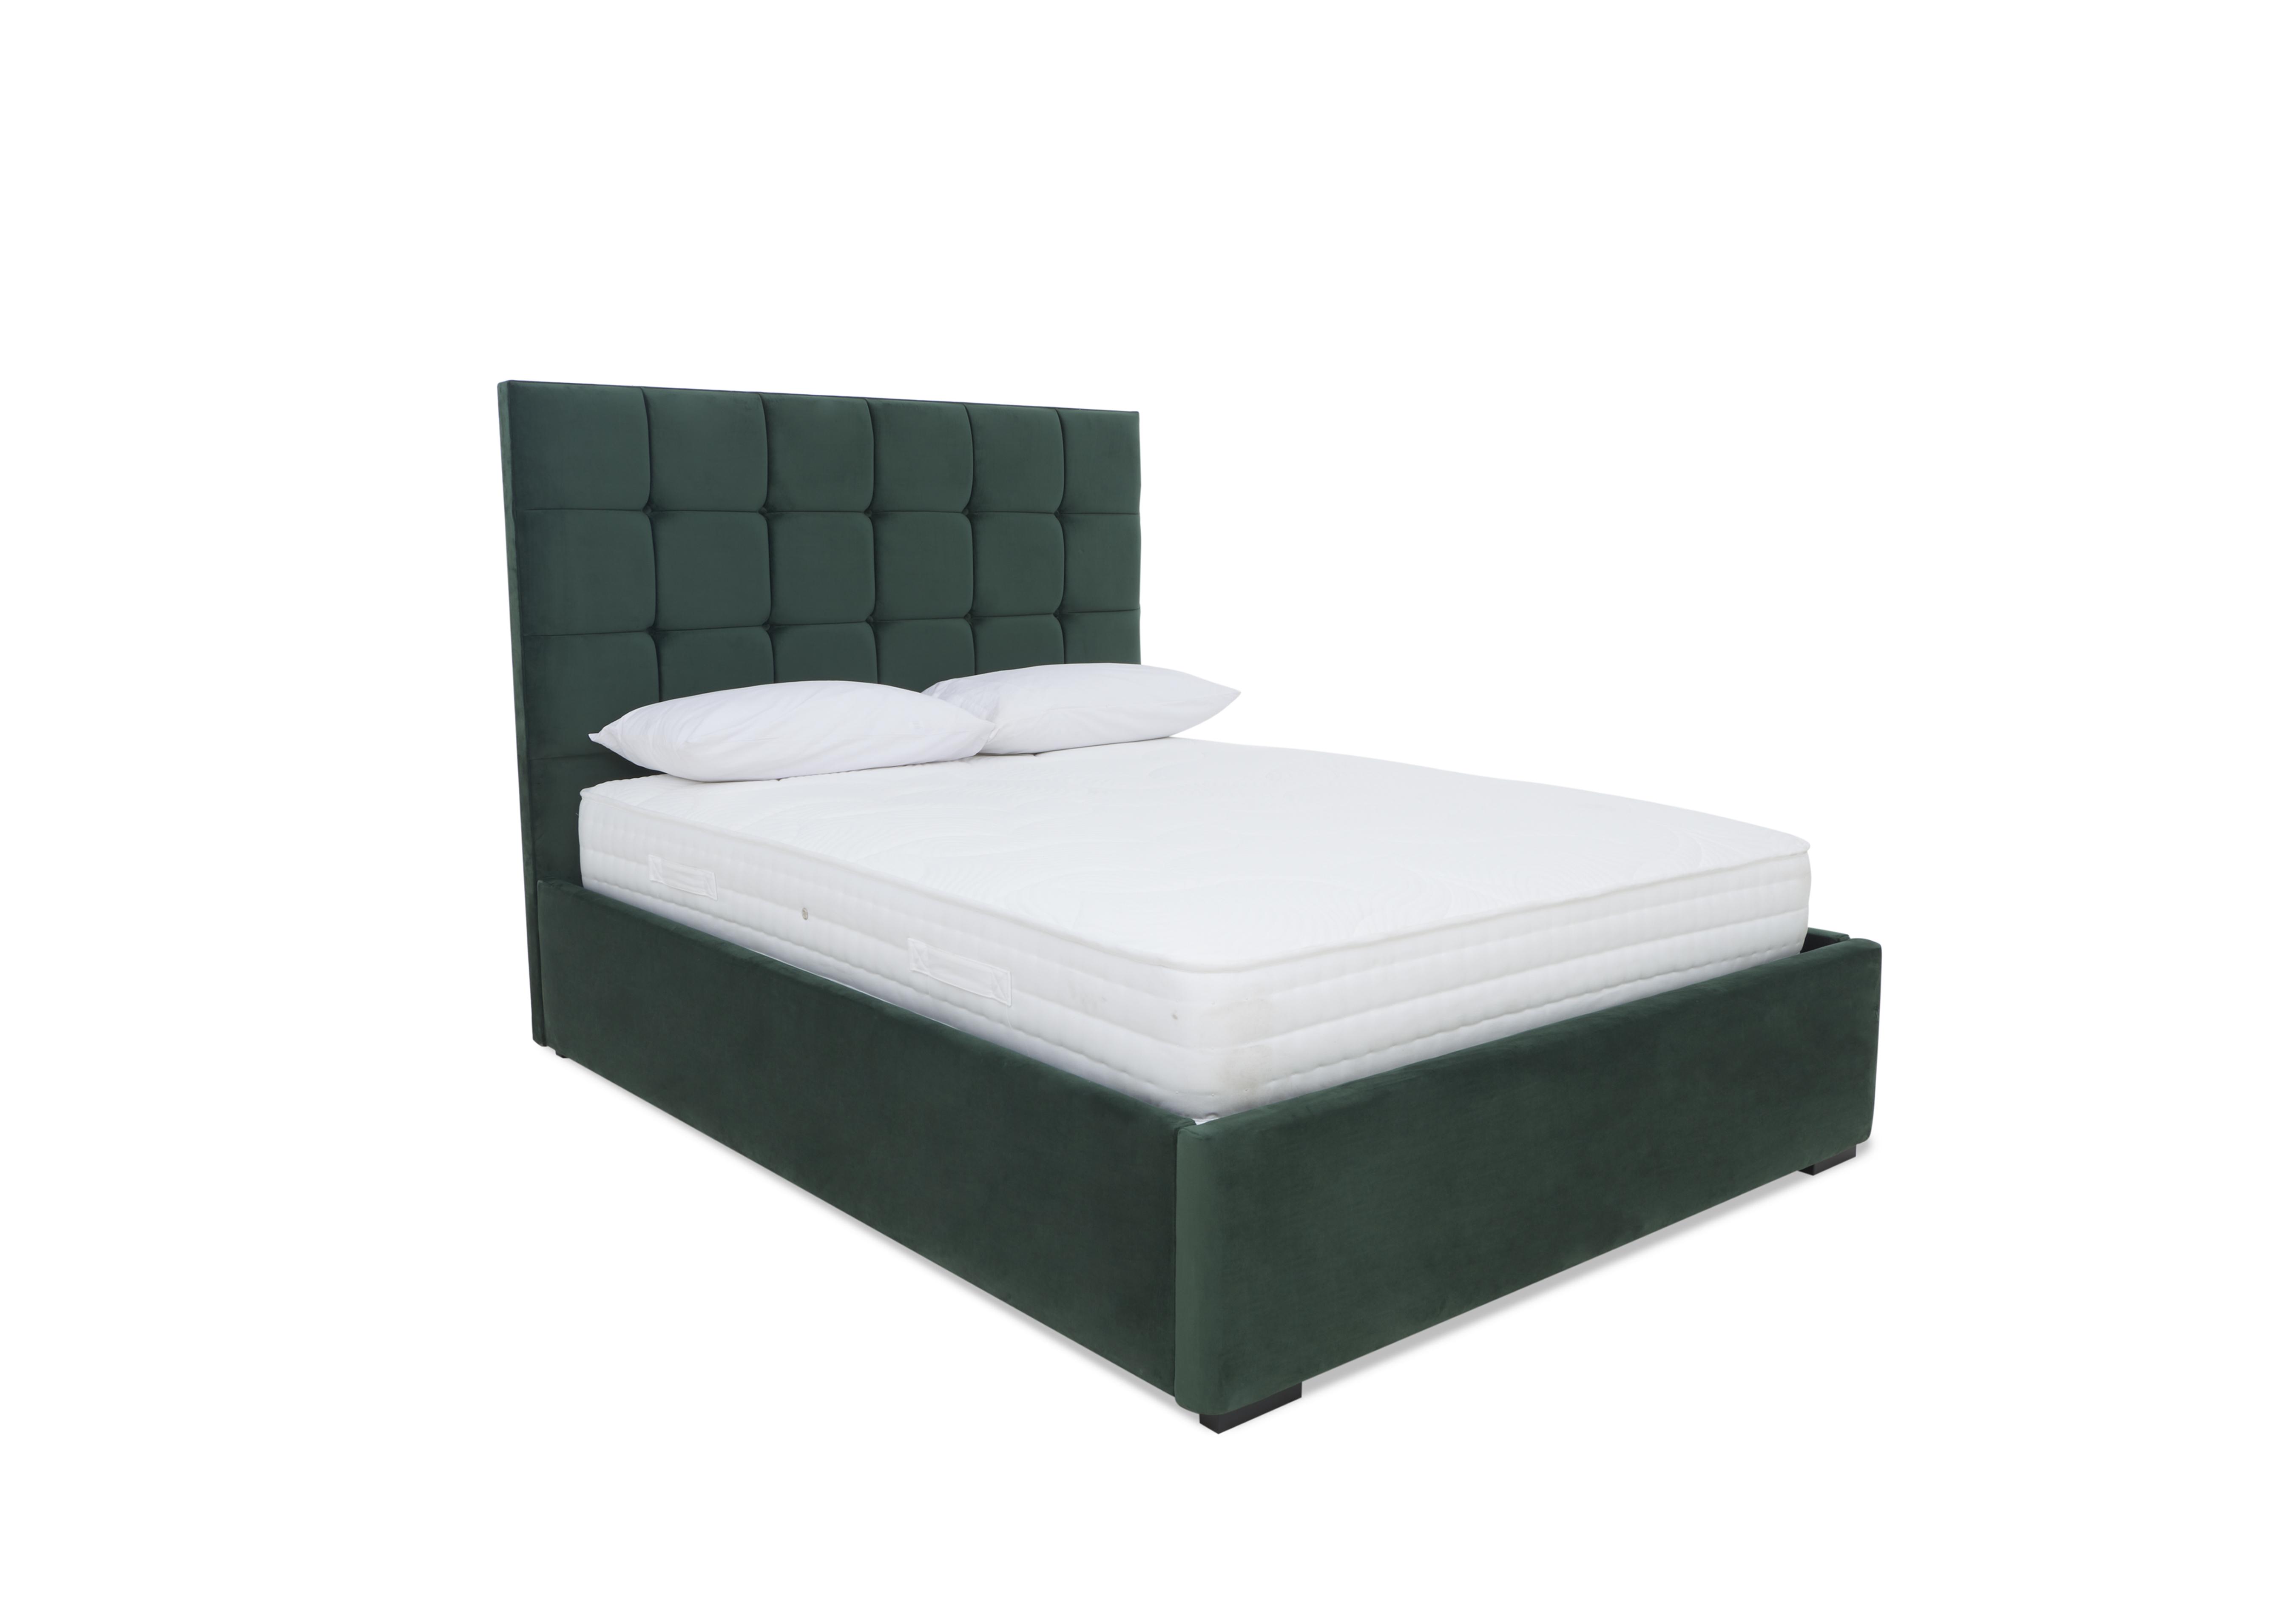 Milne Electric Ottoman Bed Frame in Plush Emerald on Furniture Village